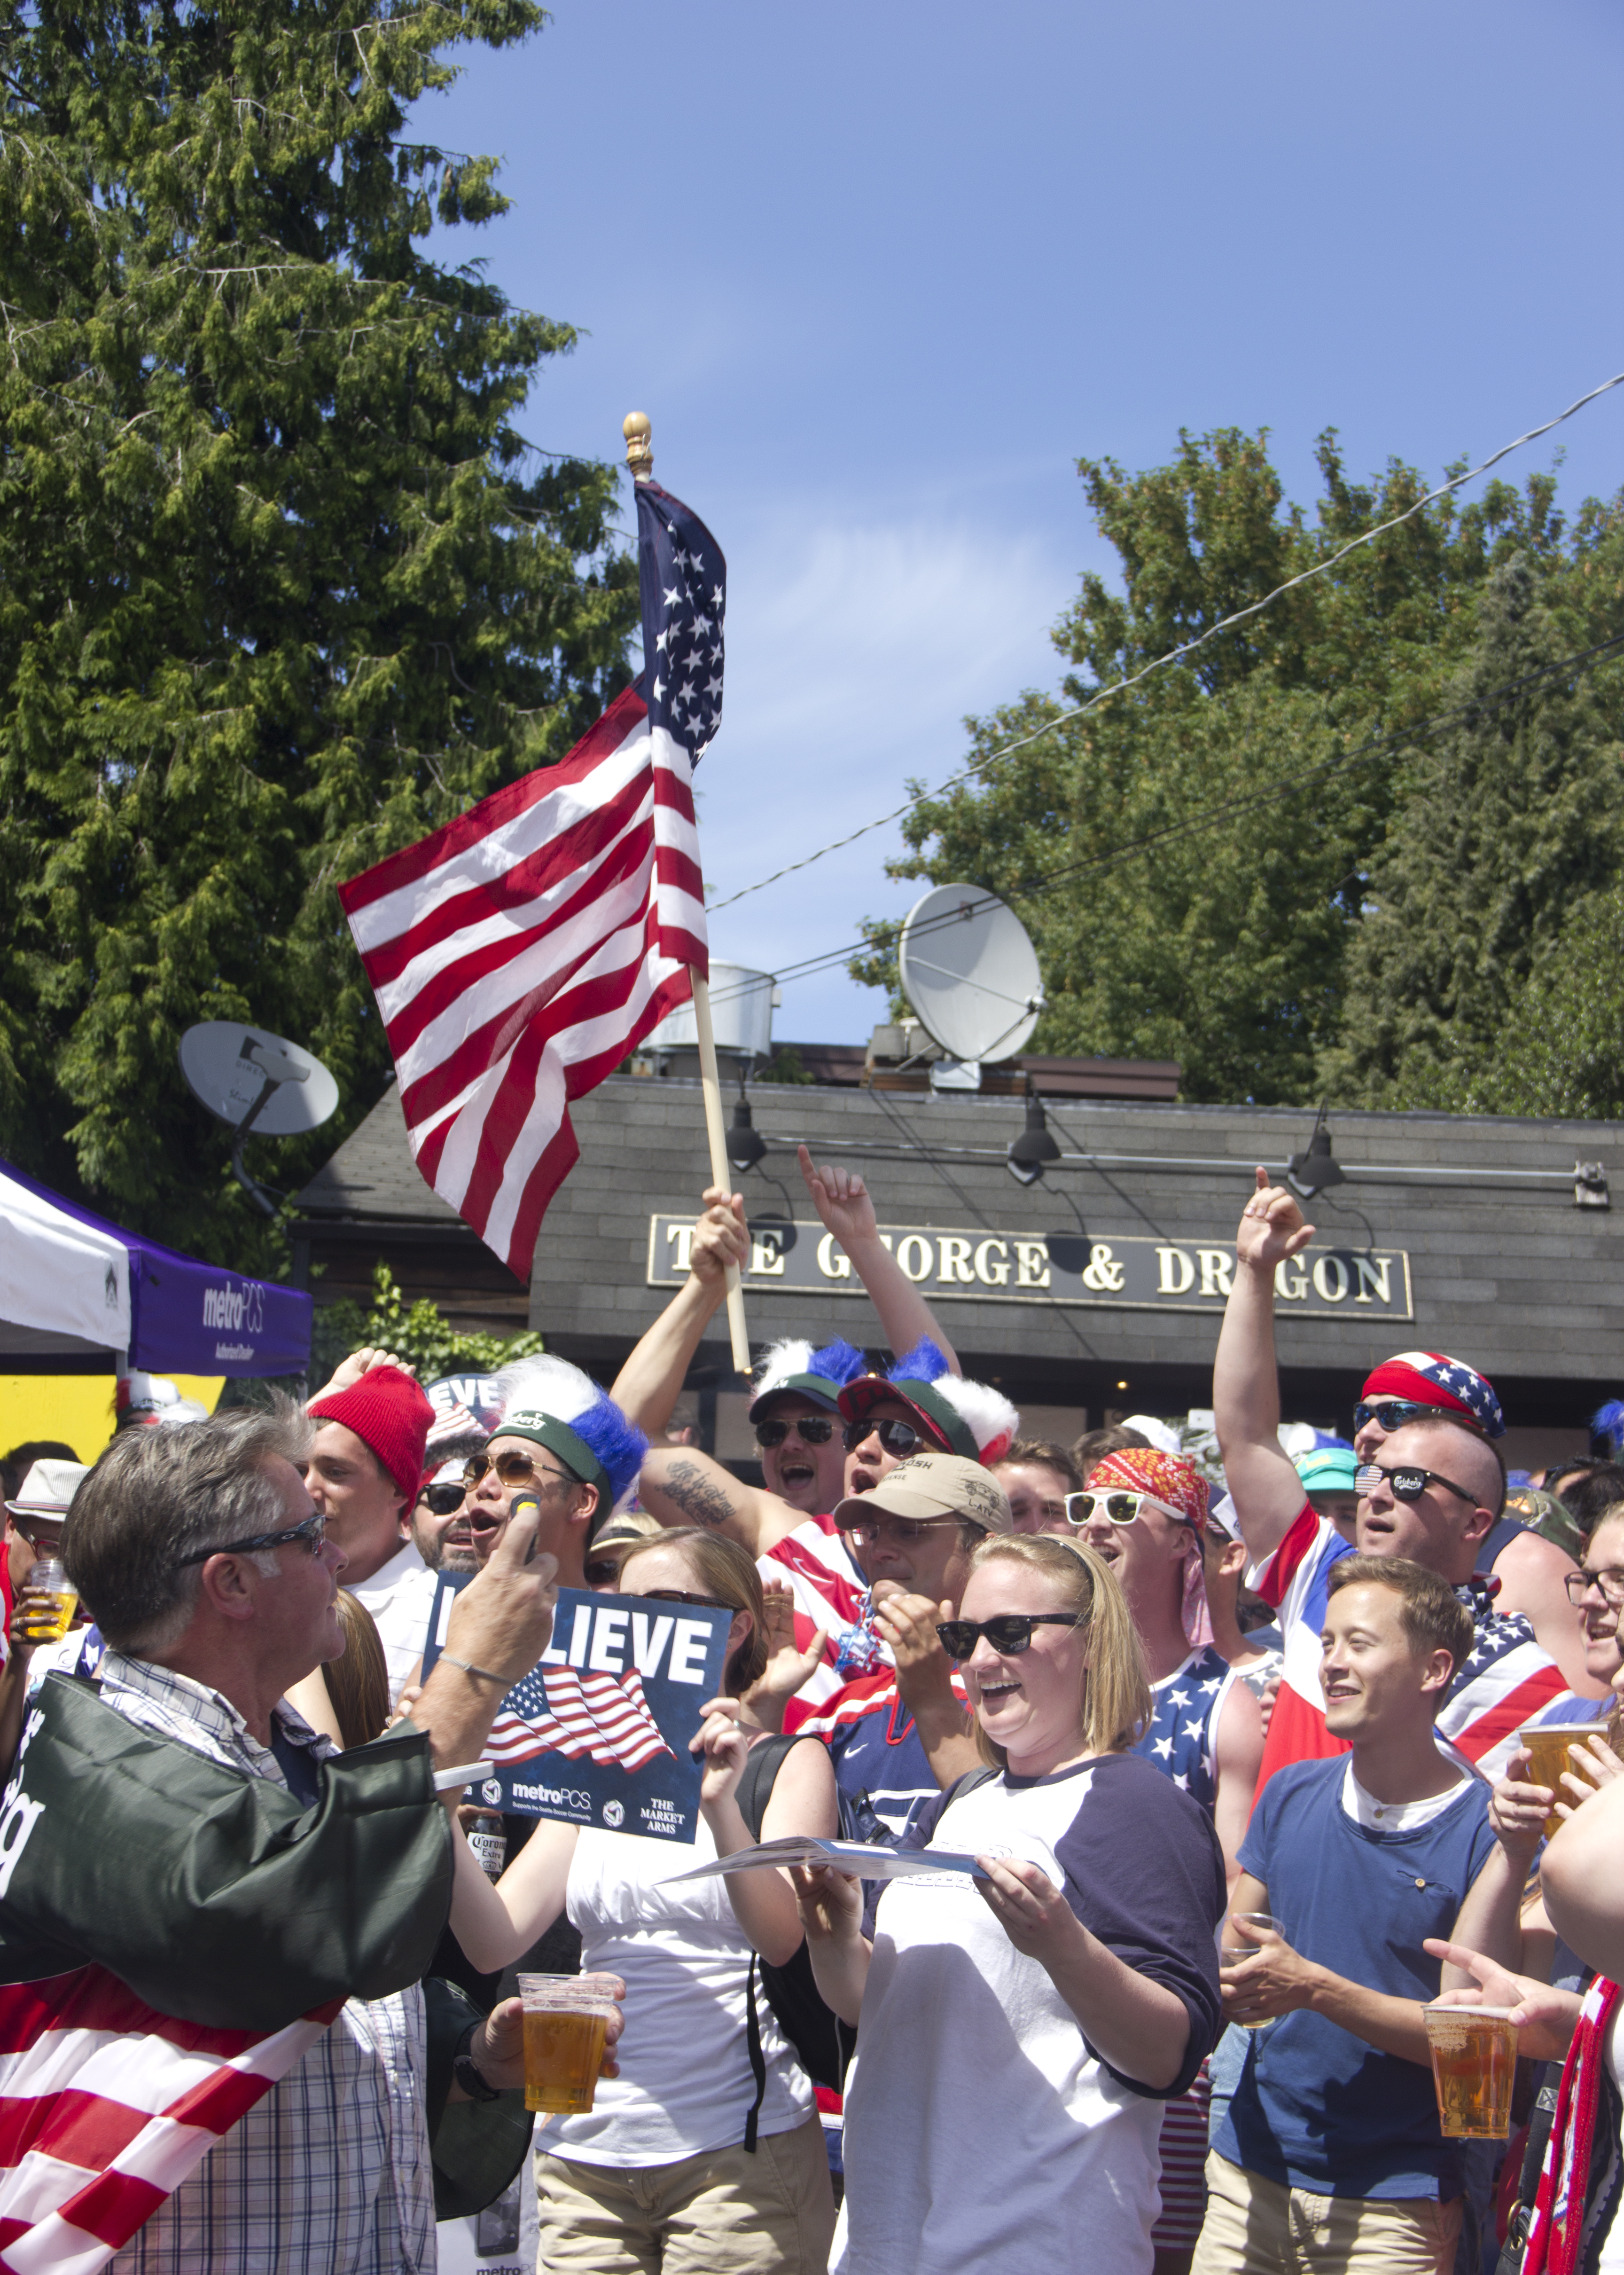 U.S soccer fans were decked out in American flag attire yesterday afternoon